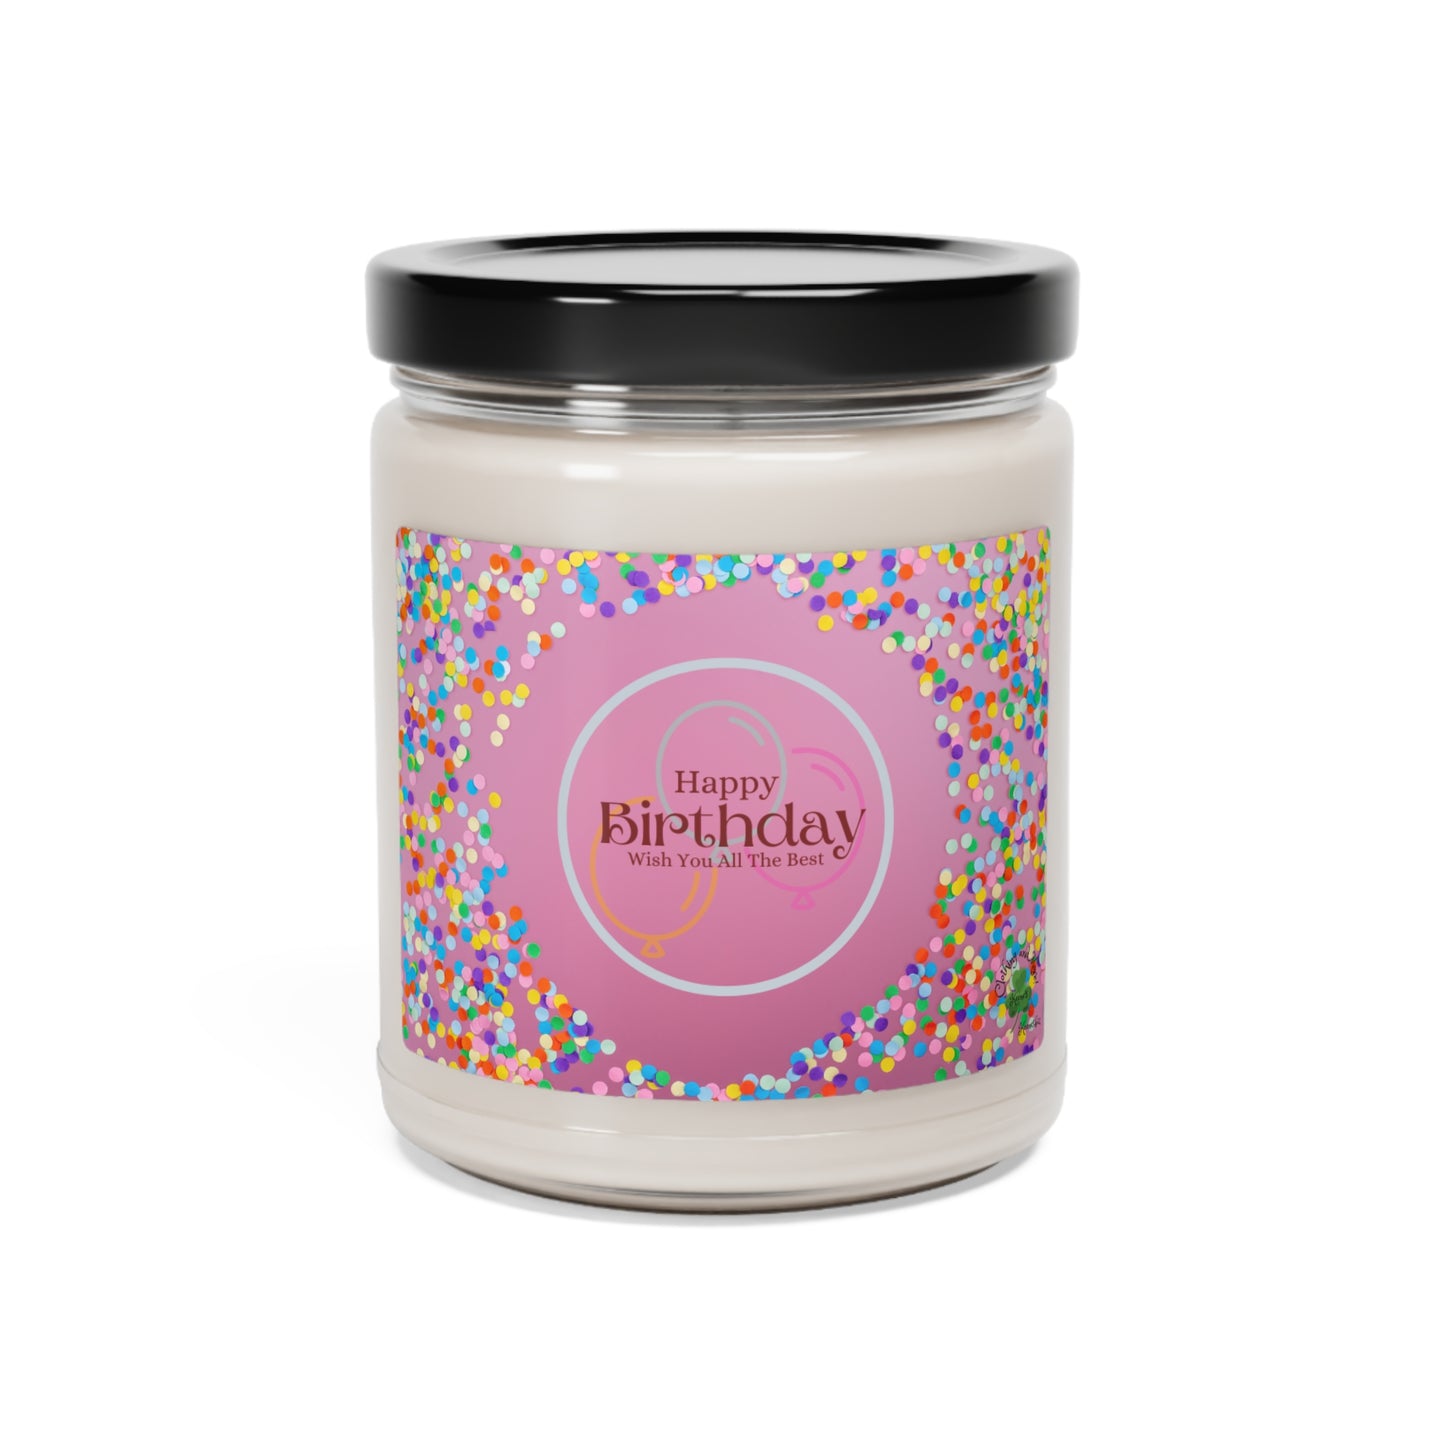 Confetti Happy Birthday Scented Soy Candle, 9oz